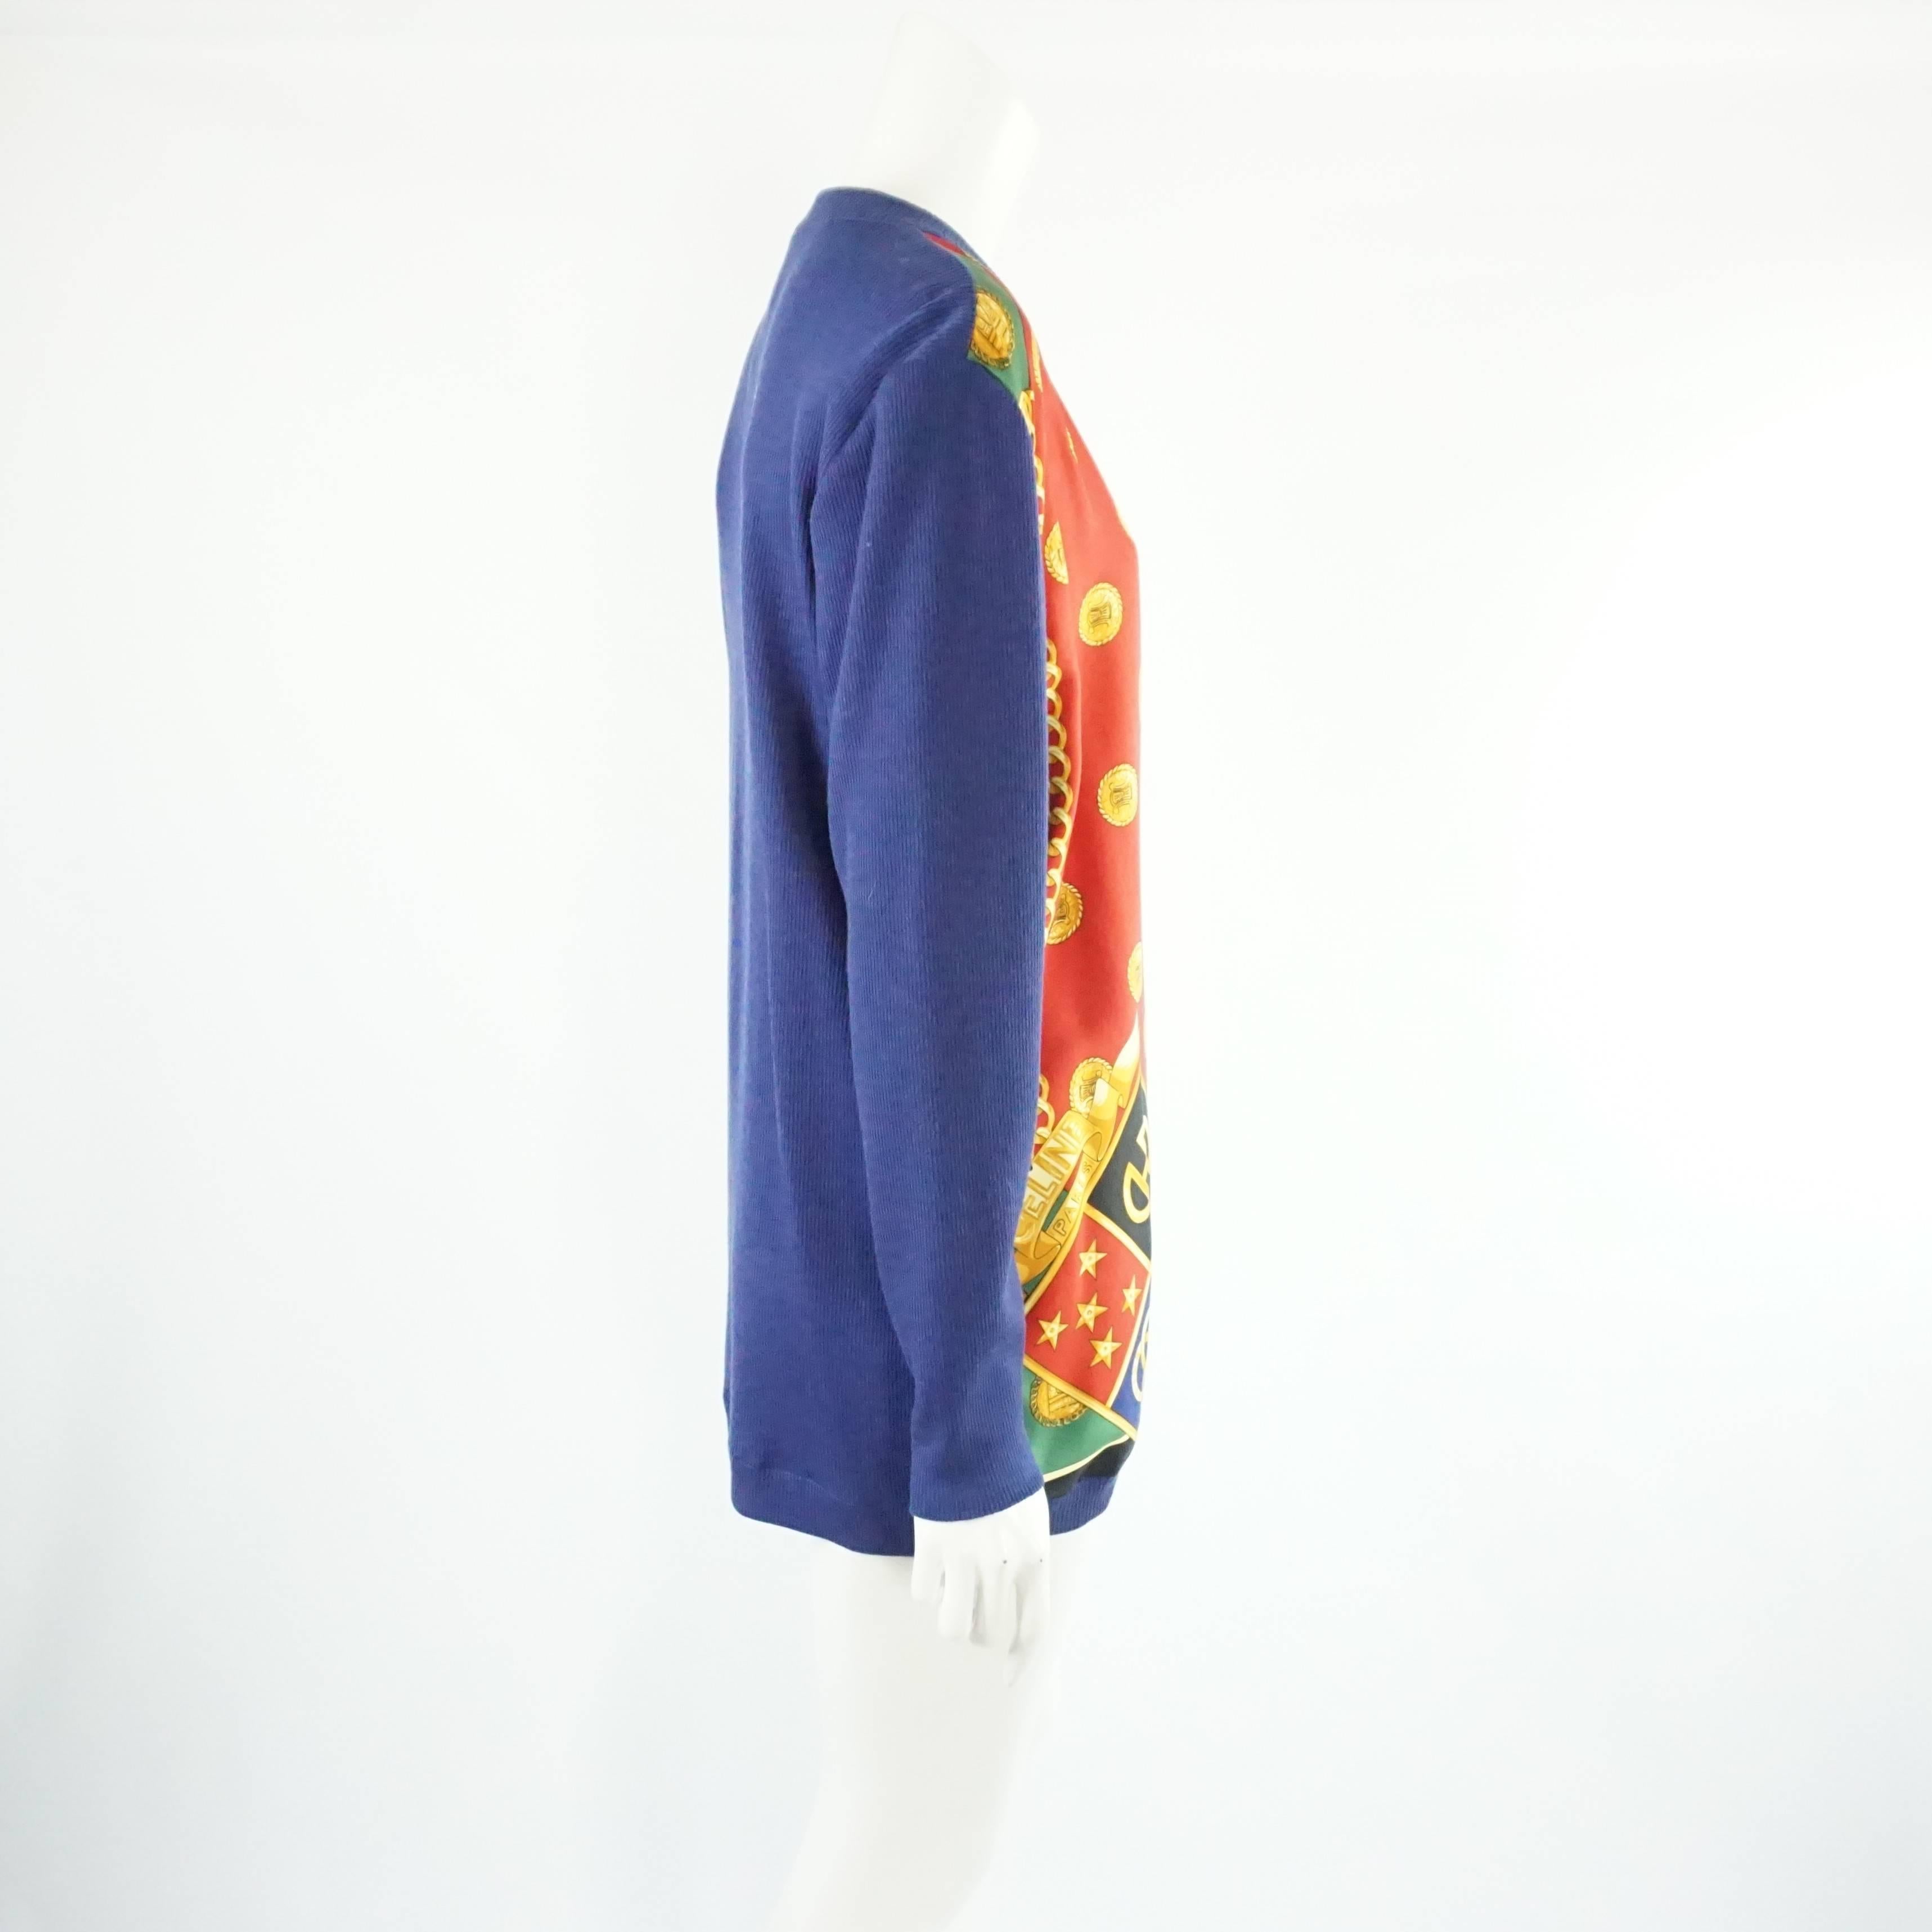 This gorgeous Celine cardigan is made of a blue knit material with a multi-color printed silk front. The print features regal accents such as a coat of arms, golden chains, and coins. The piece is in excellent vintage condition with minimal wear.